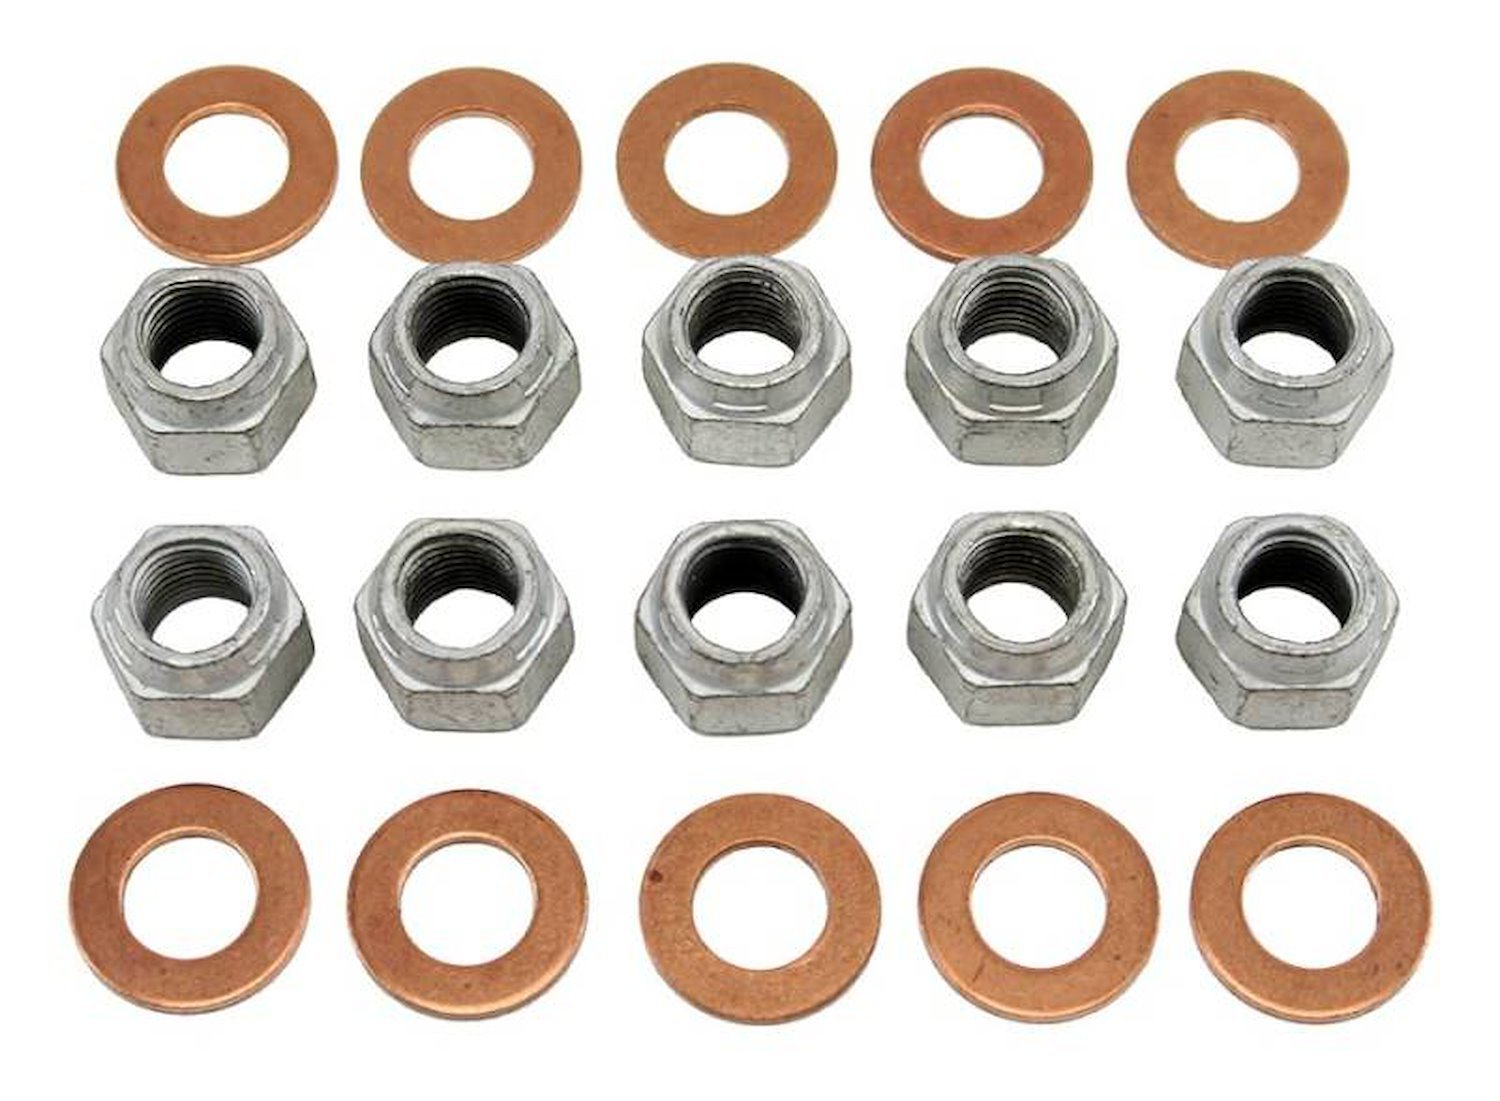 MDK001 1964-1967 Ford Mustang & 1957-67 Full-Size Ford Rear Housing Differential Nuts & Washers